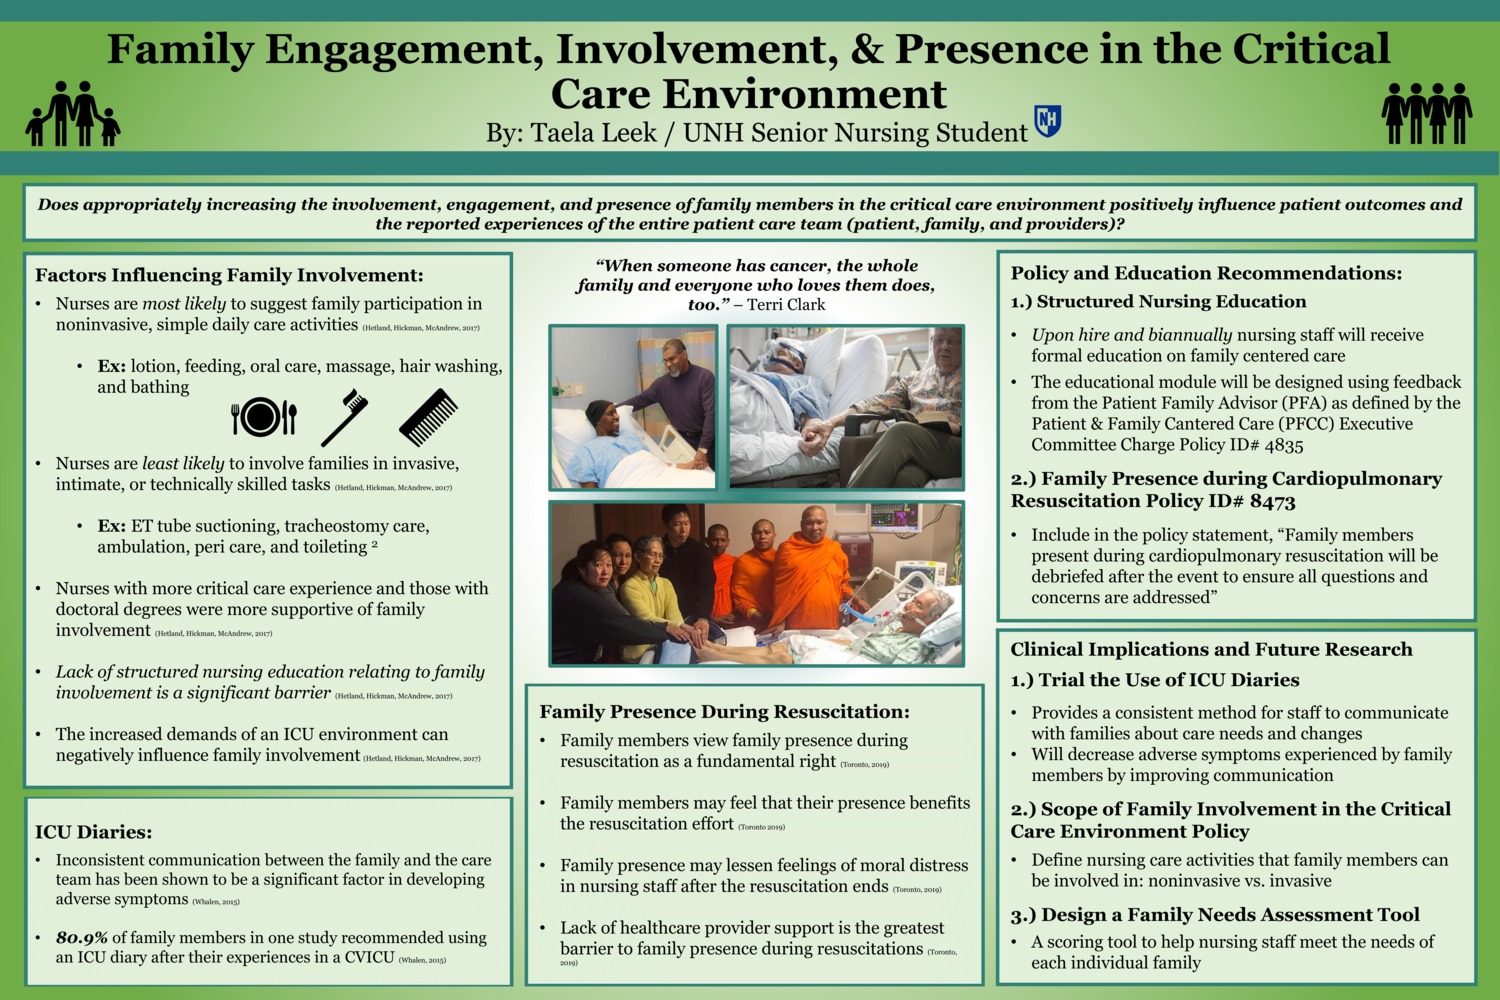 Family Engagement, Involvement, & Presence In The Critical Care Environment by tl1030